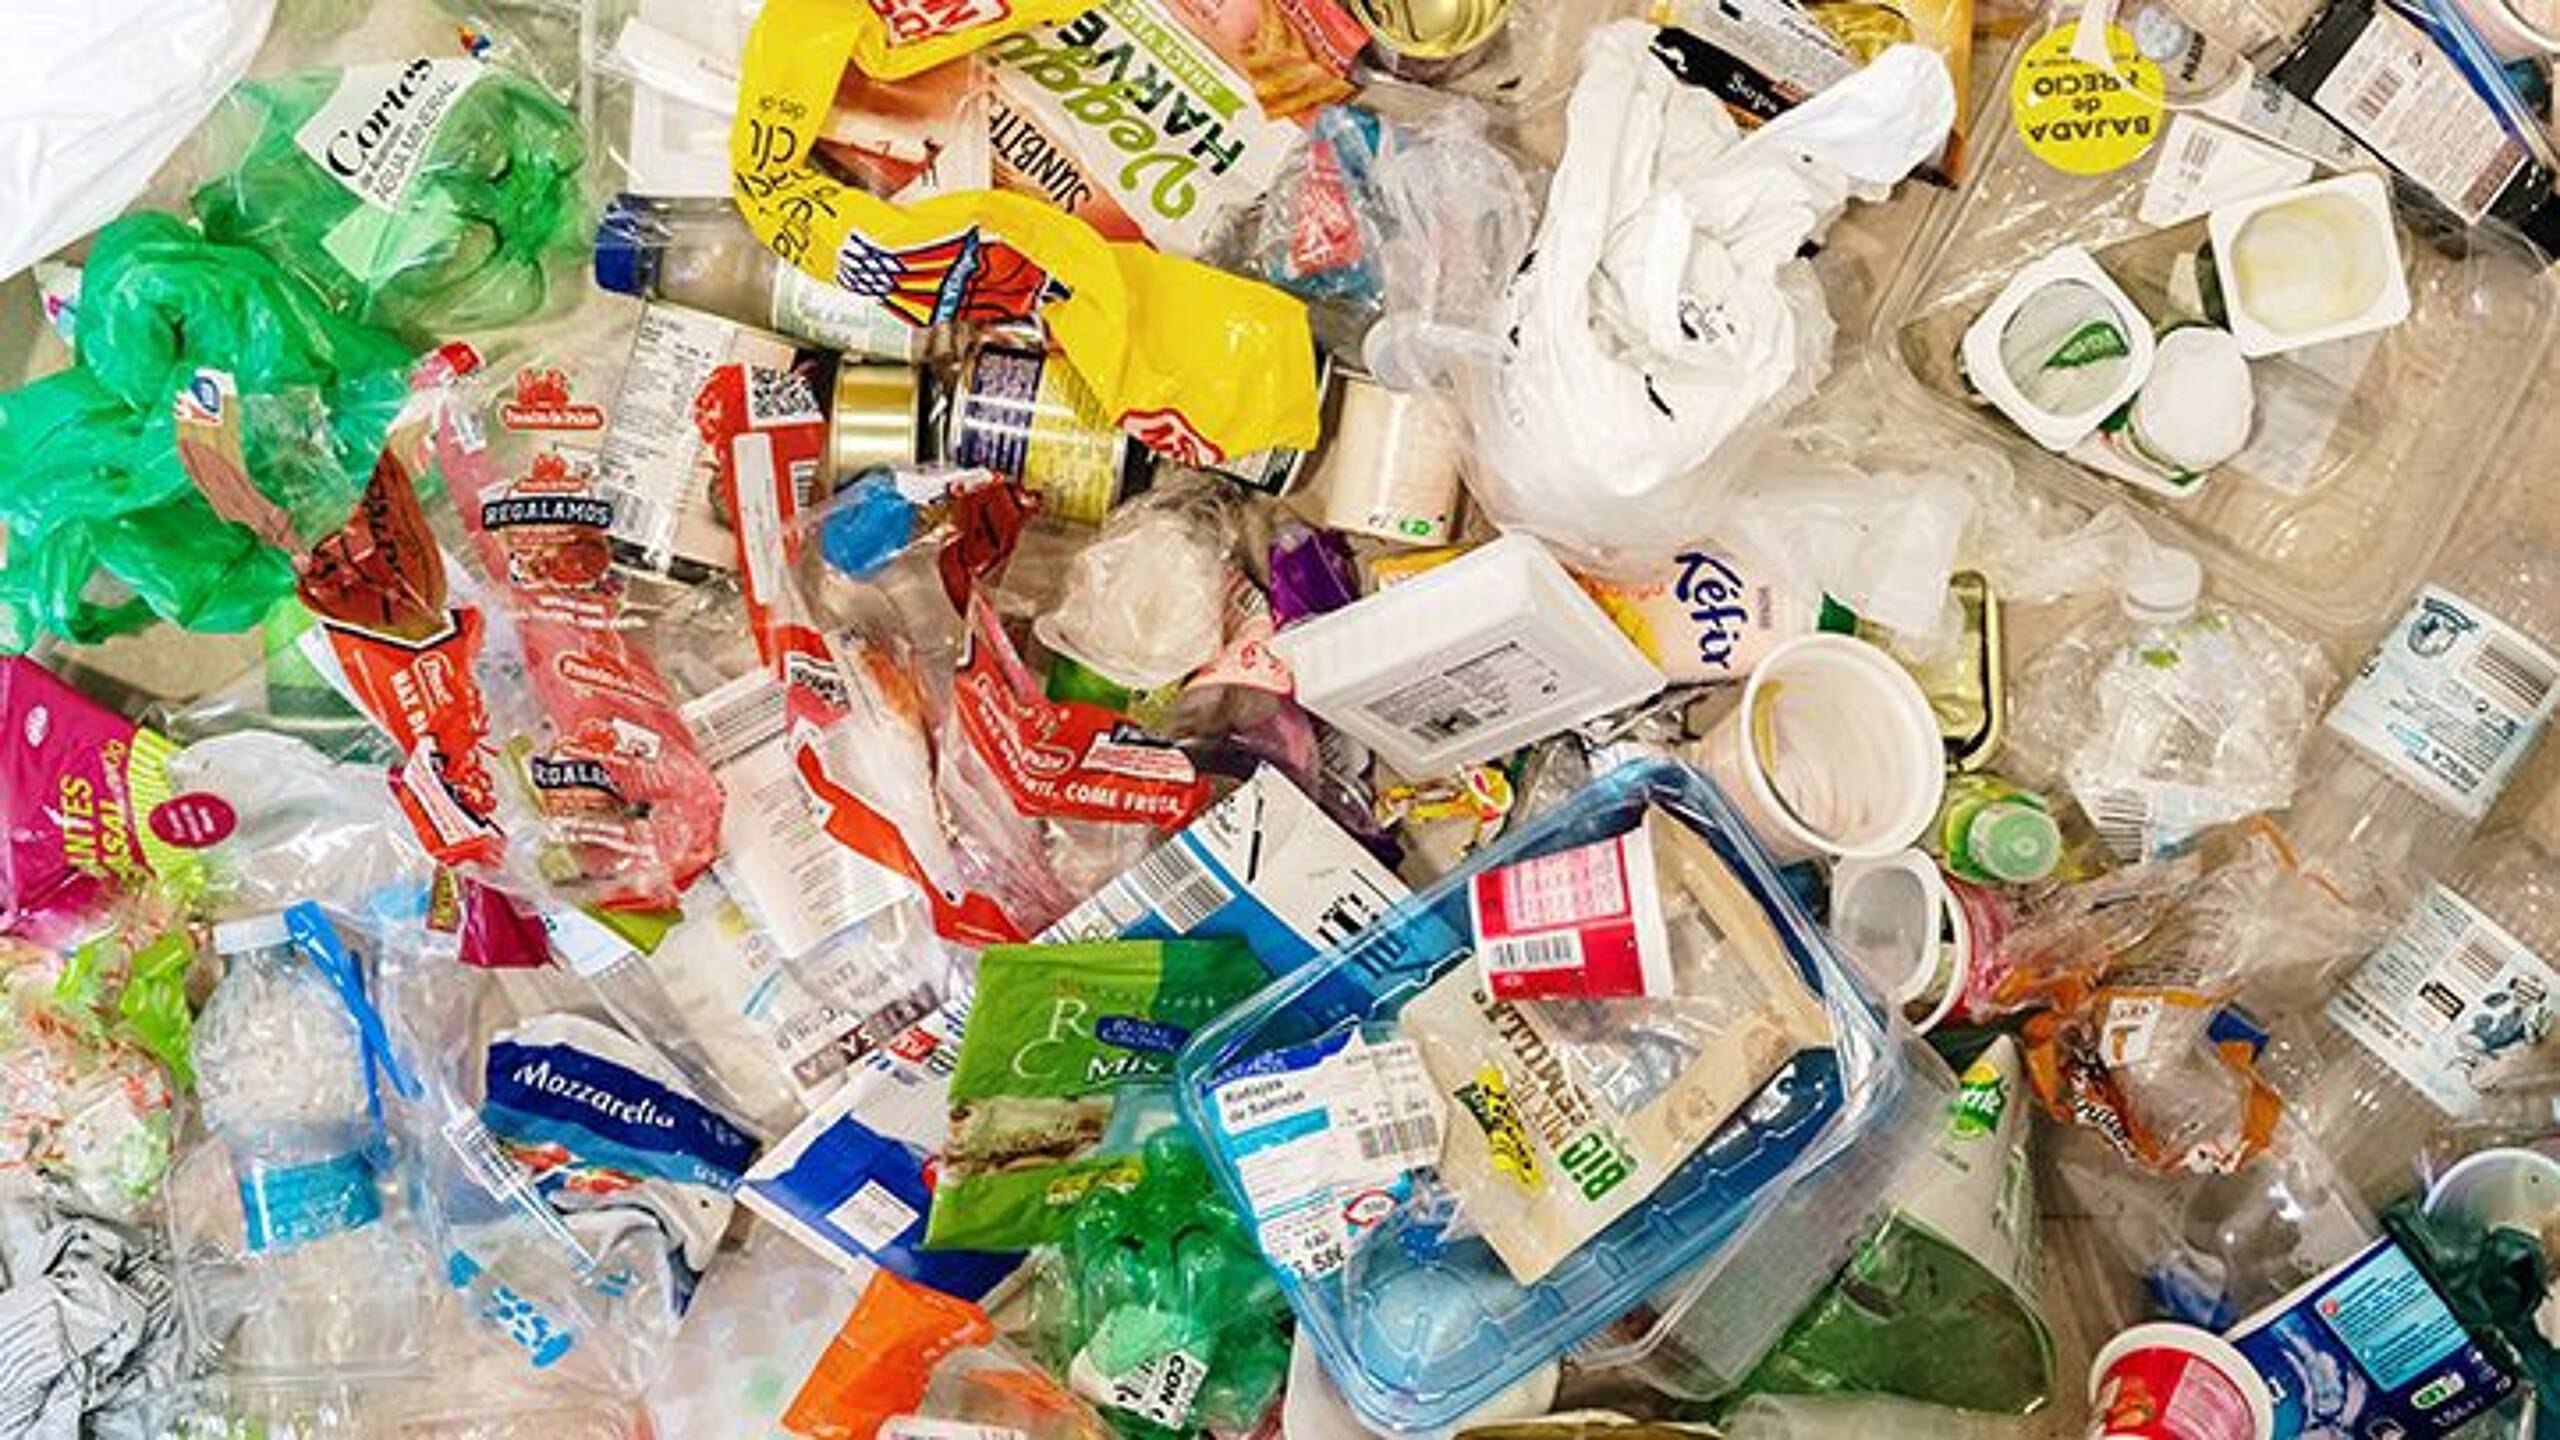 Ellen MacArthur Foundation: Corporate plastic recycling and reuse targets ‘unlikely to be met’